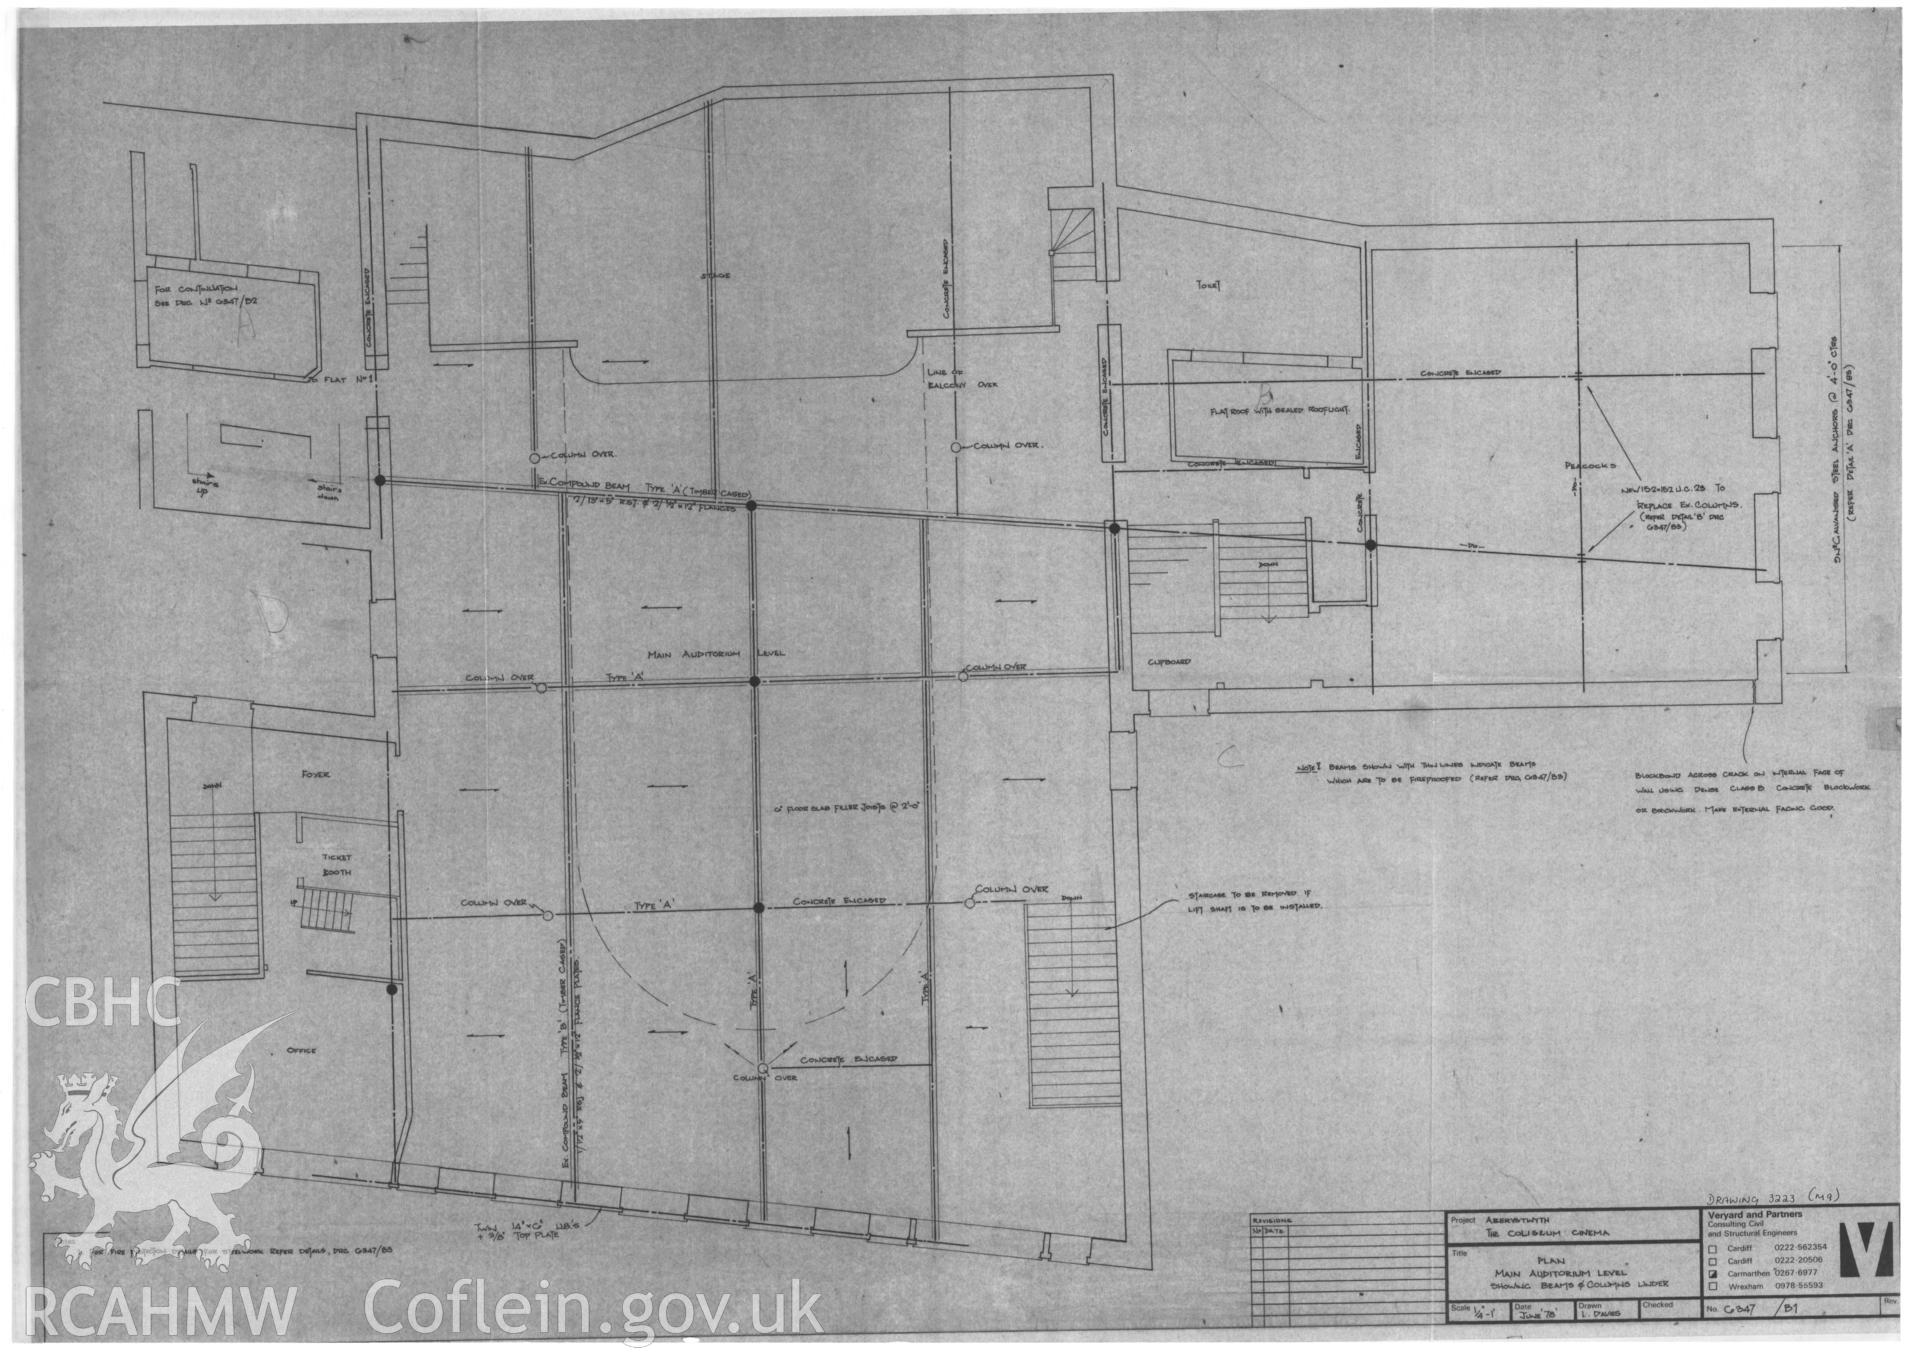 Copy of a non RCAHMW drawing showing main auditorium plan of Coliseum Cinema, Aberystwyth, received in the course of threatened buildings case ref no M/DES/B/CD/79/01